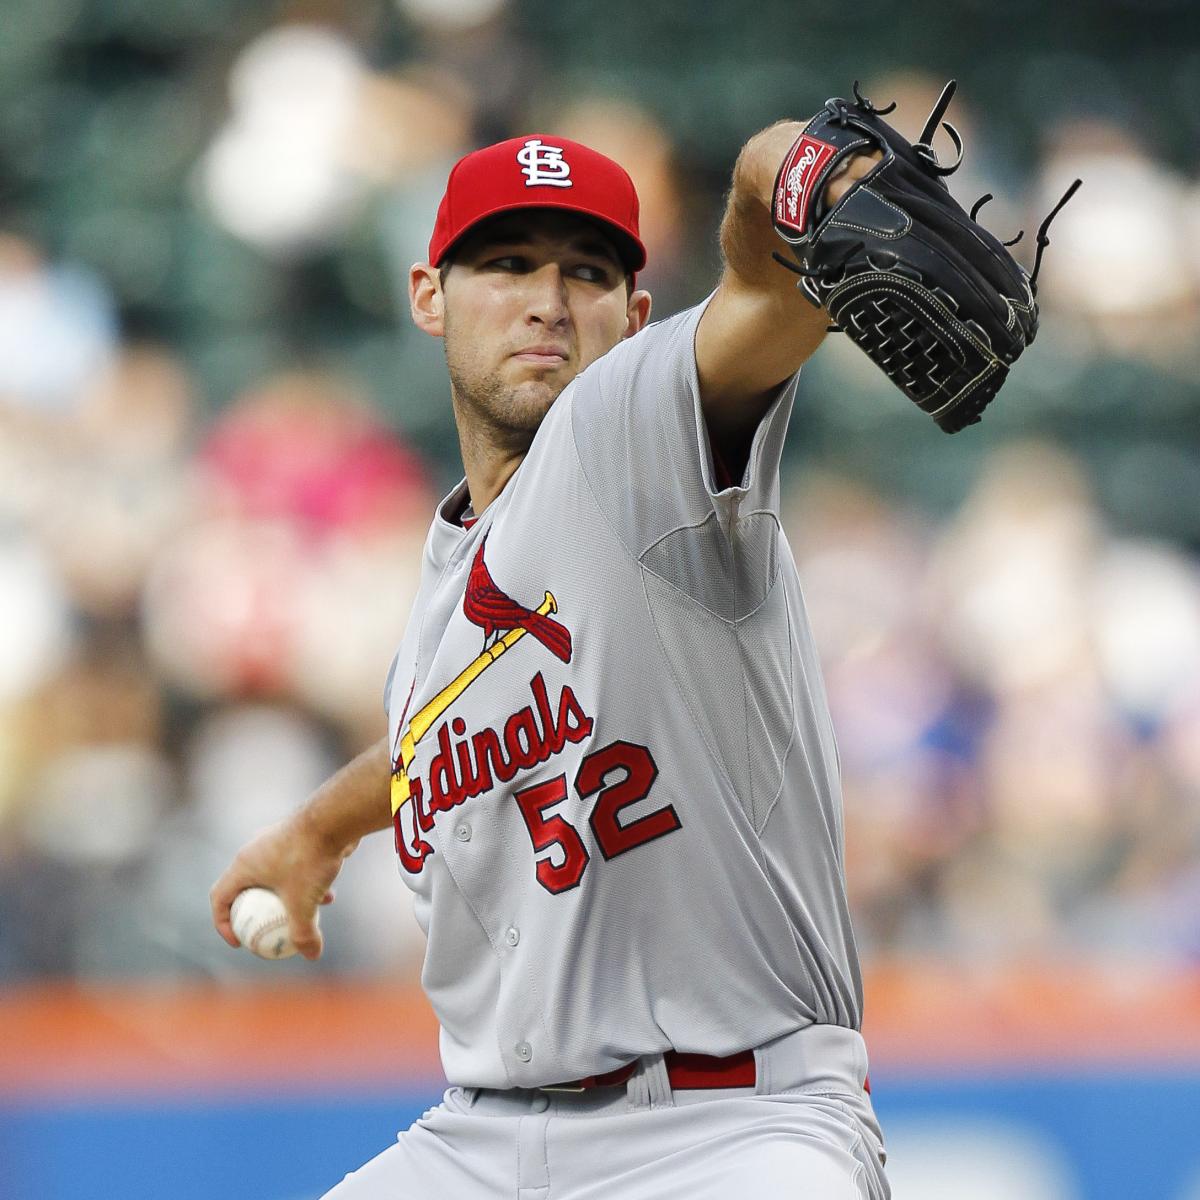 Stock Up, Stock Down for St. Louis Cardinals Top 10 Prospects, Week of